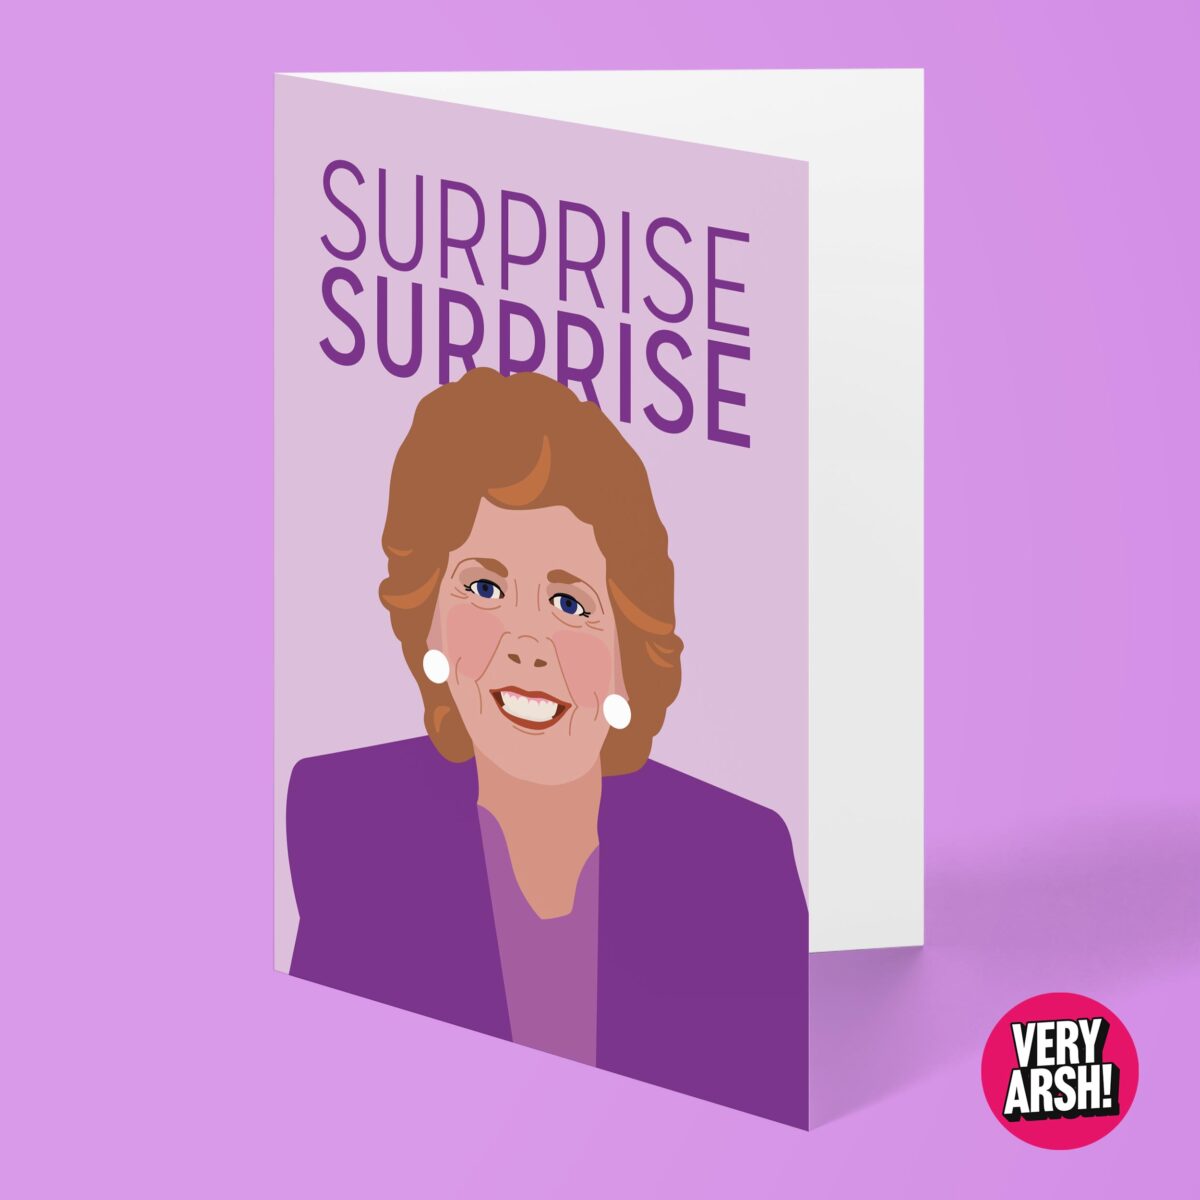 Surprise Surprise - Cilla Black inspired Greeting Card, Birthday Card